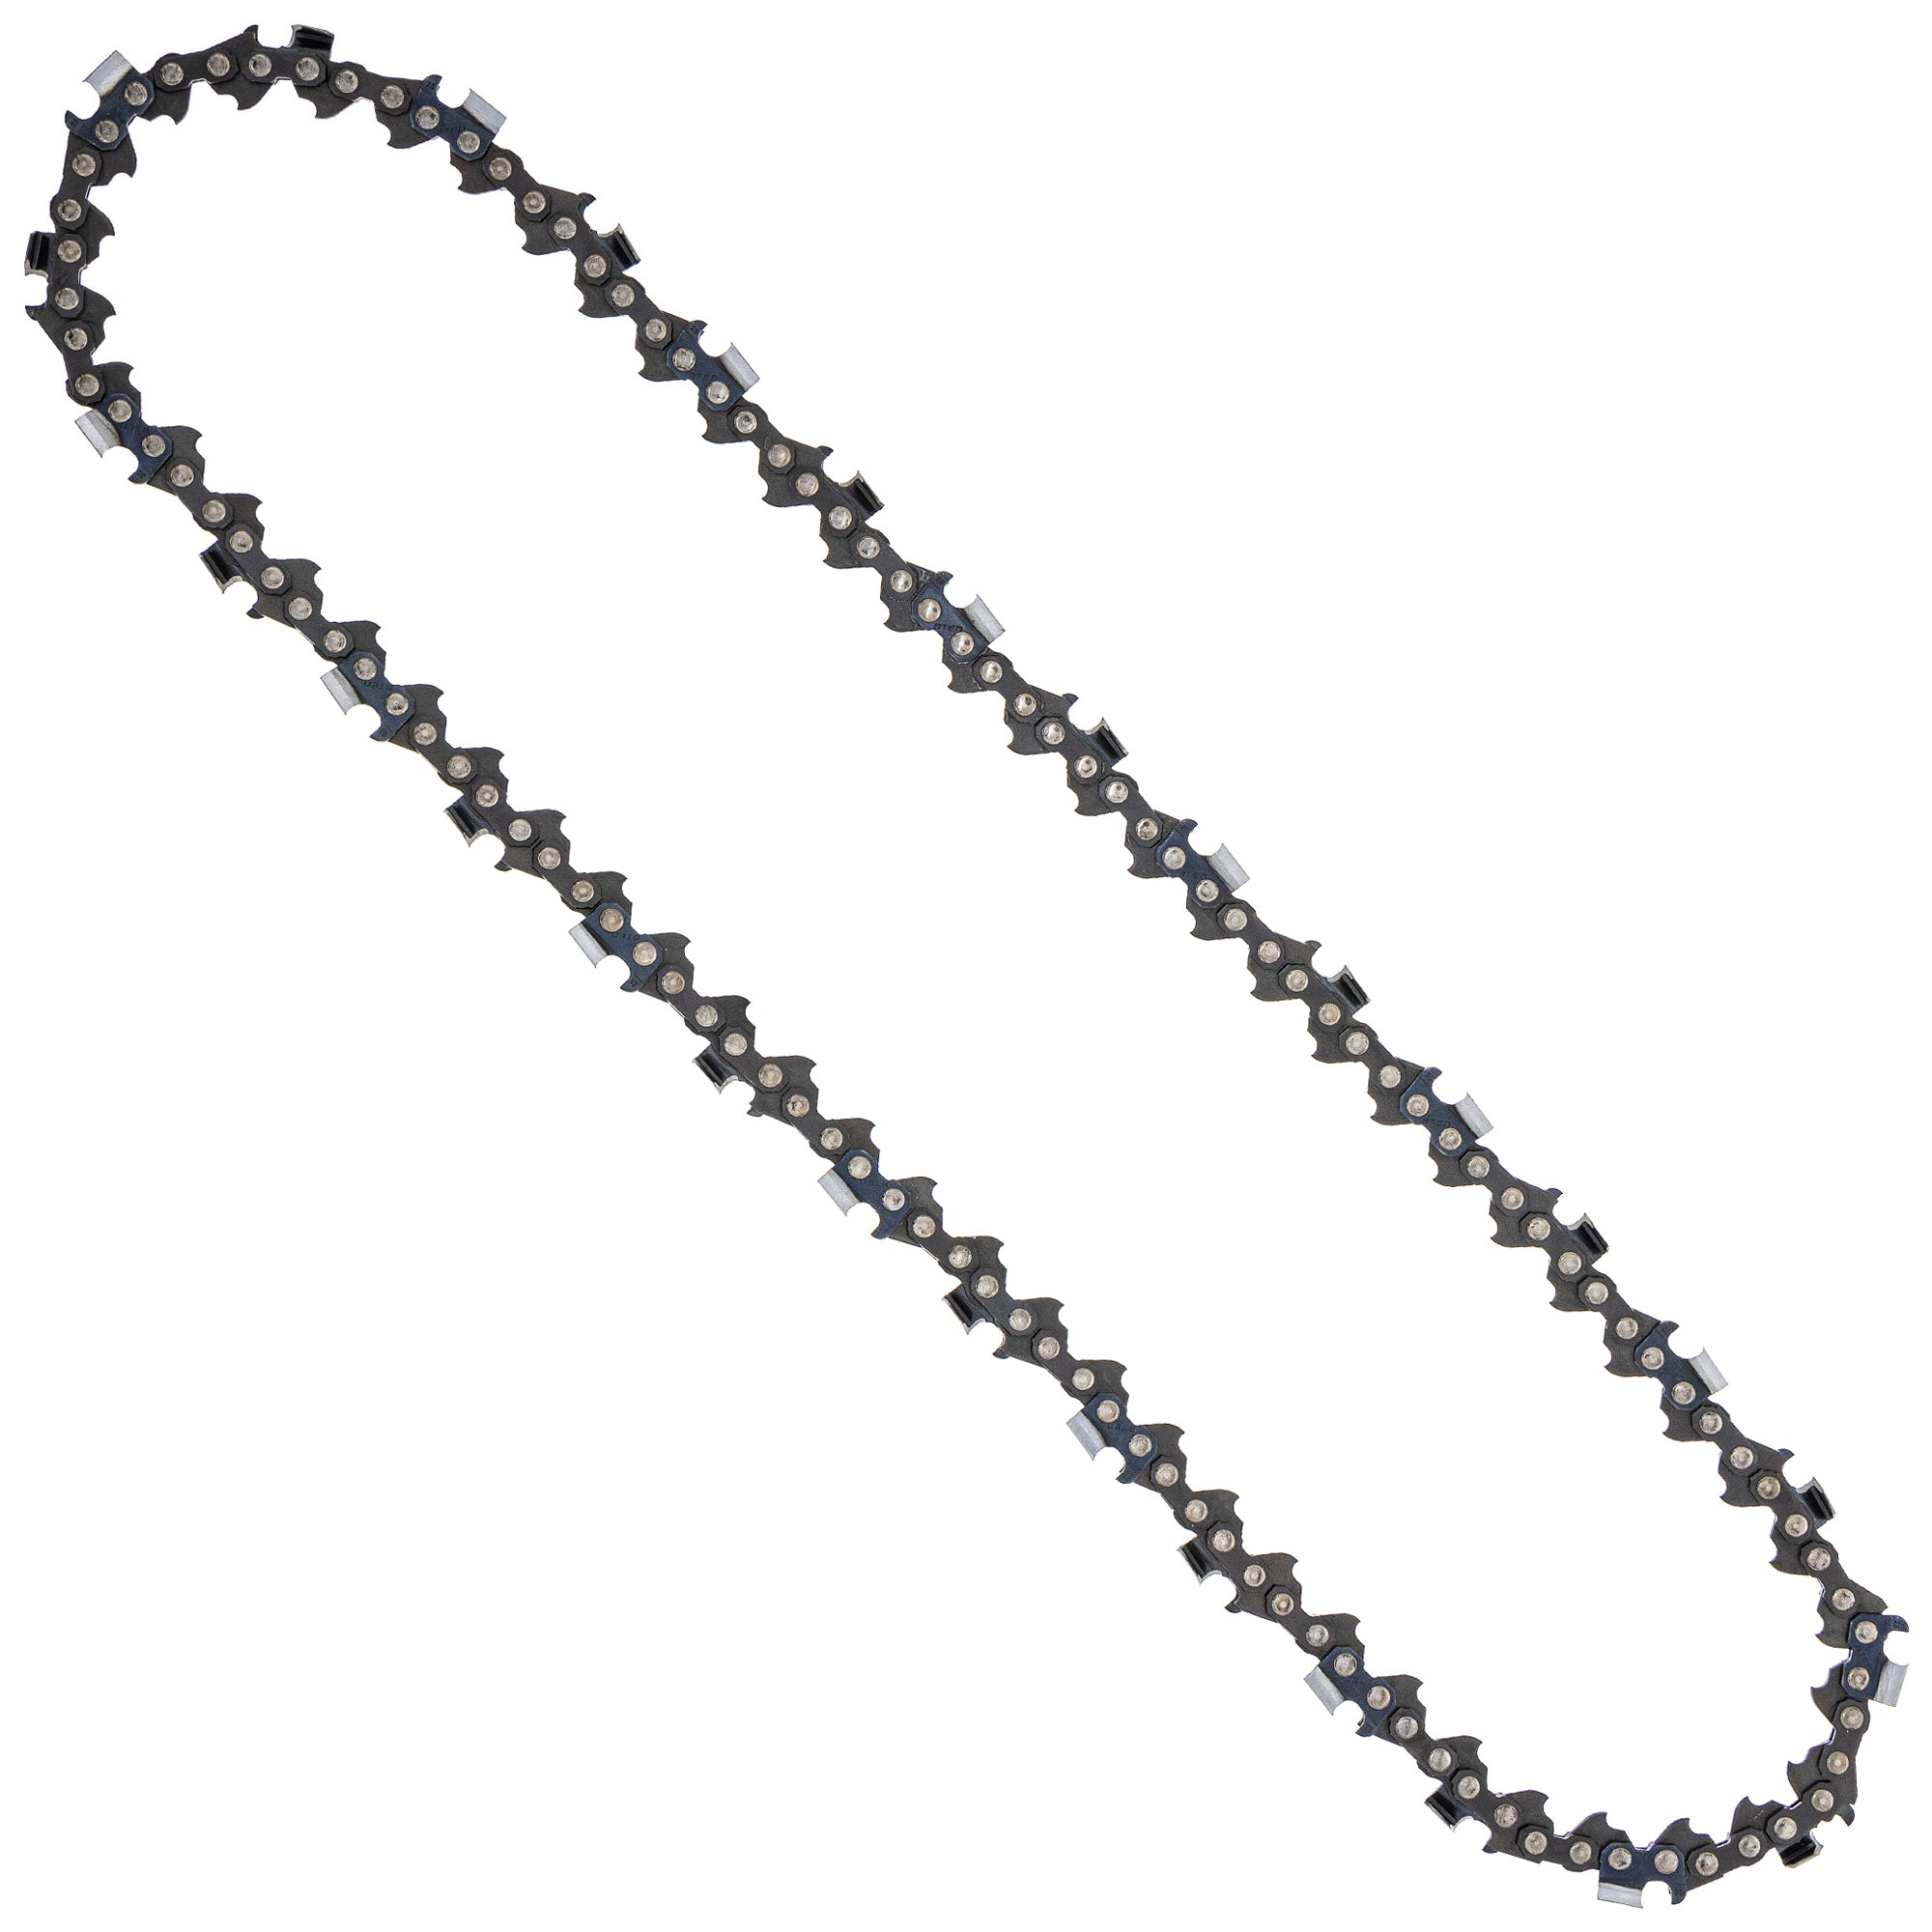 8TEN 810-CCC2360H Chain 10-Pack for zOTHER Oregon Husqvarna Poulan